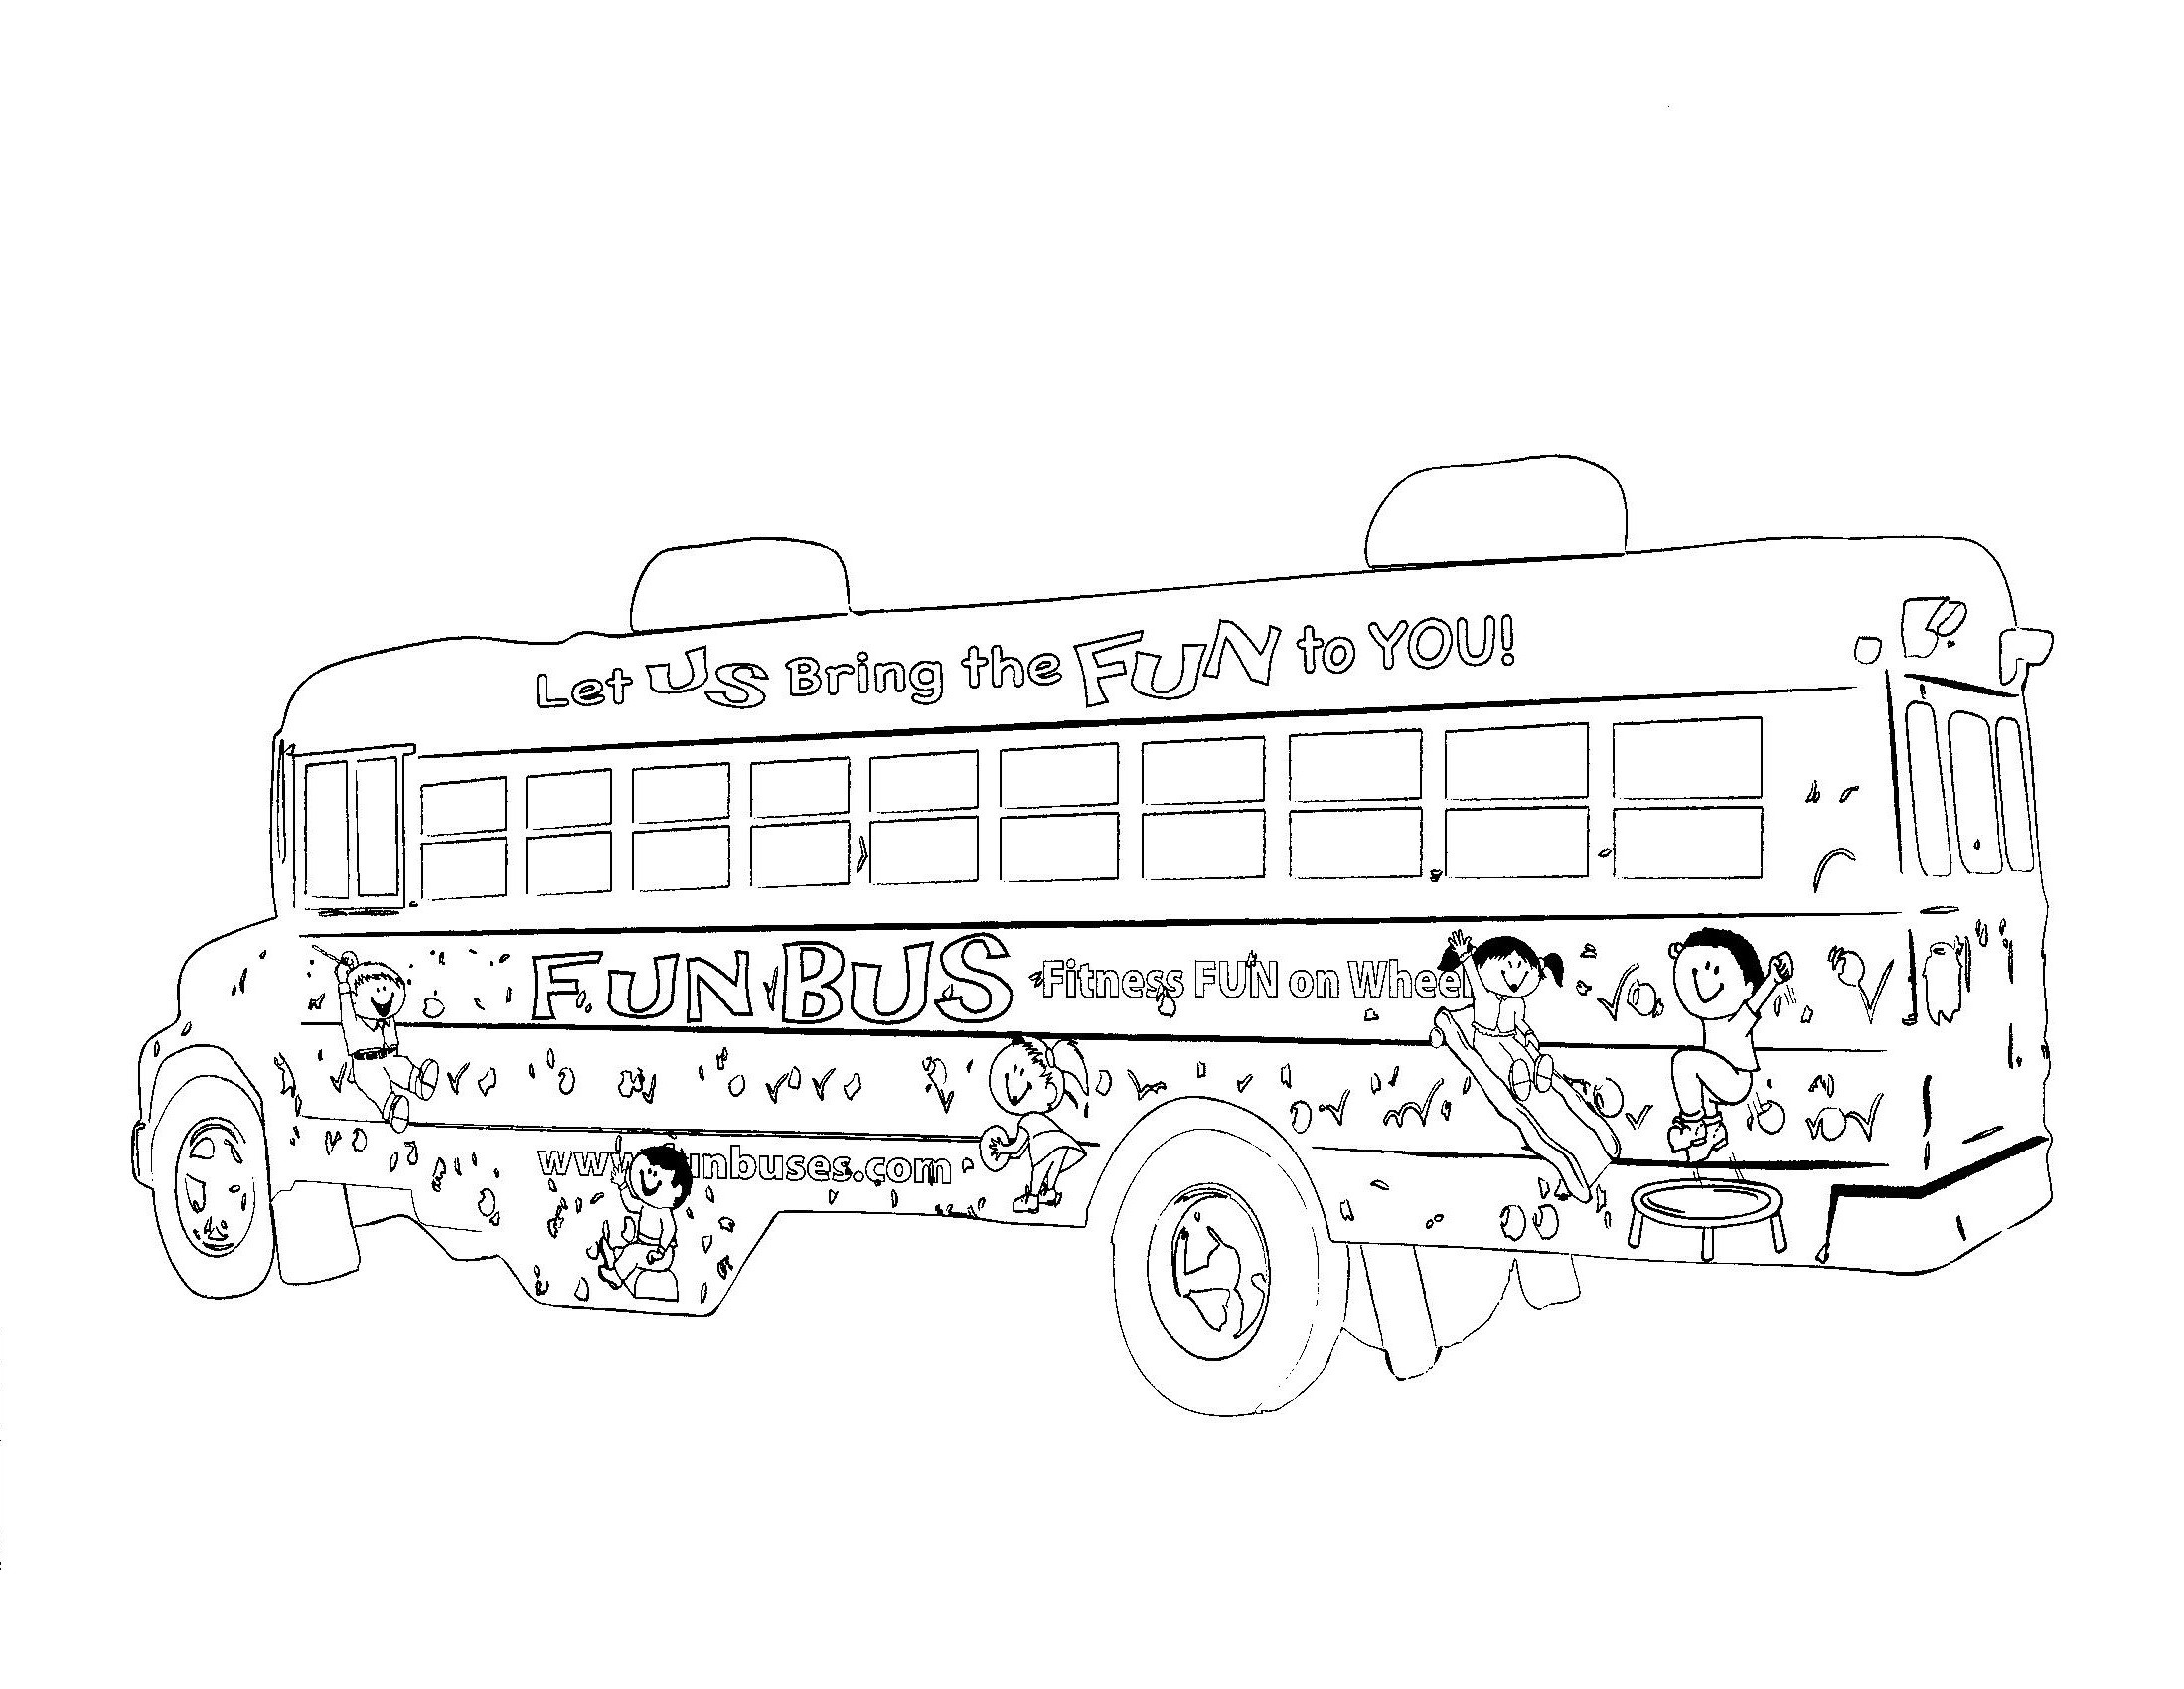 School Bus Printable Coloring Pages
 Free Printable School Bus Coloring Pages For Kids